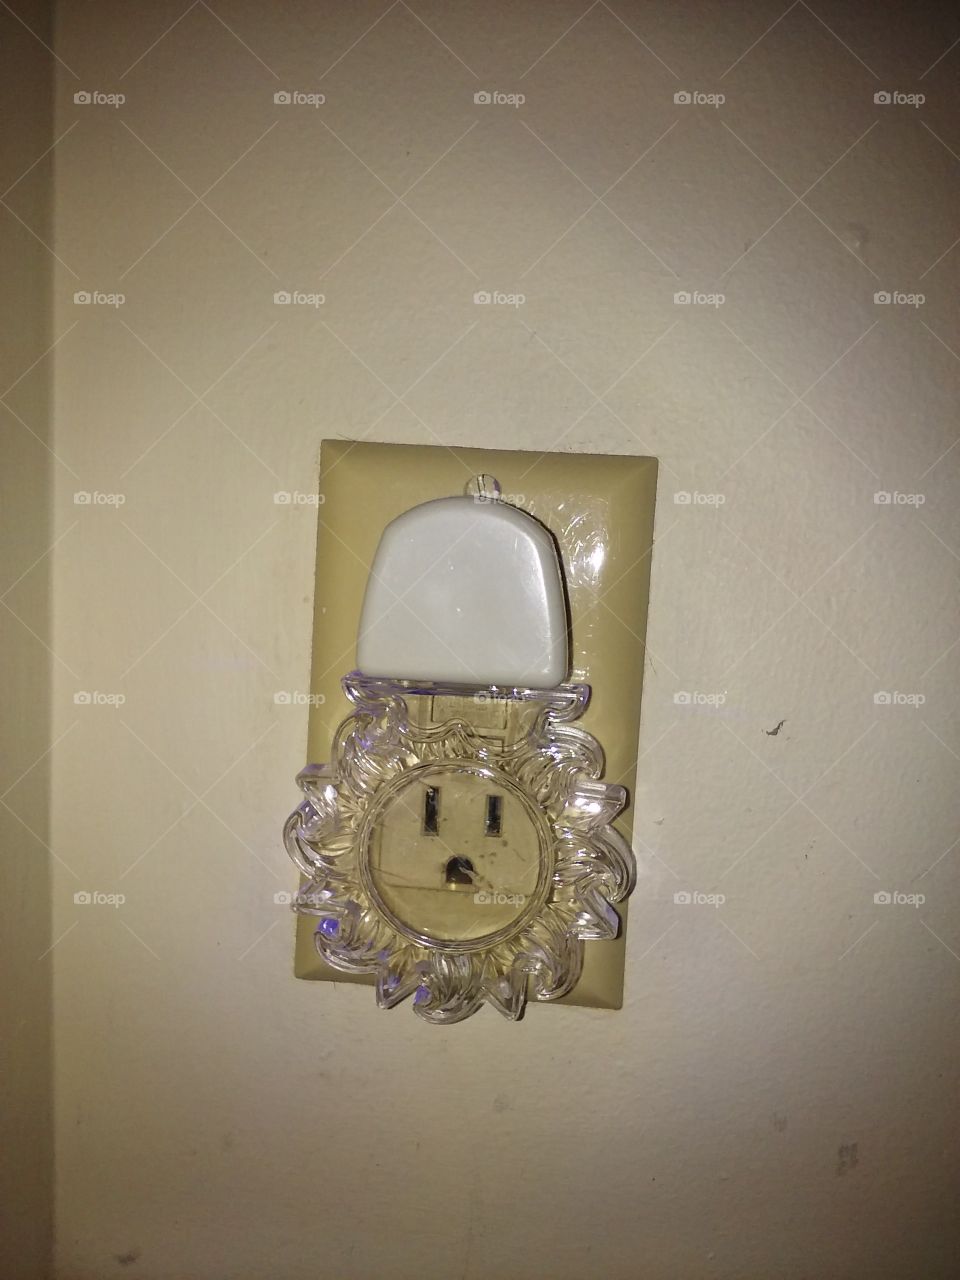 LED night light plugged in upside down and looks like it's scared!